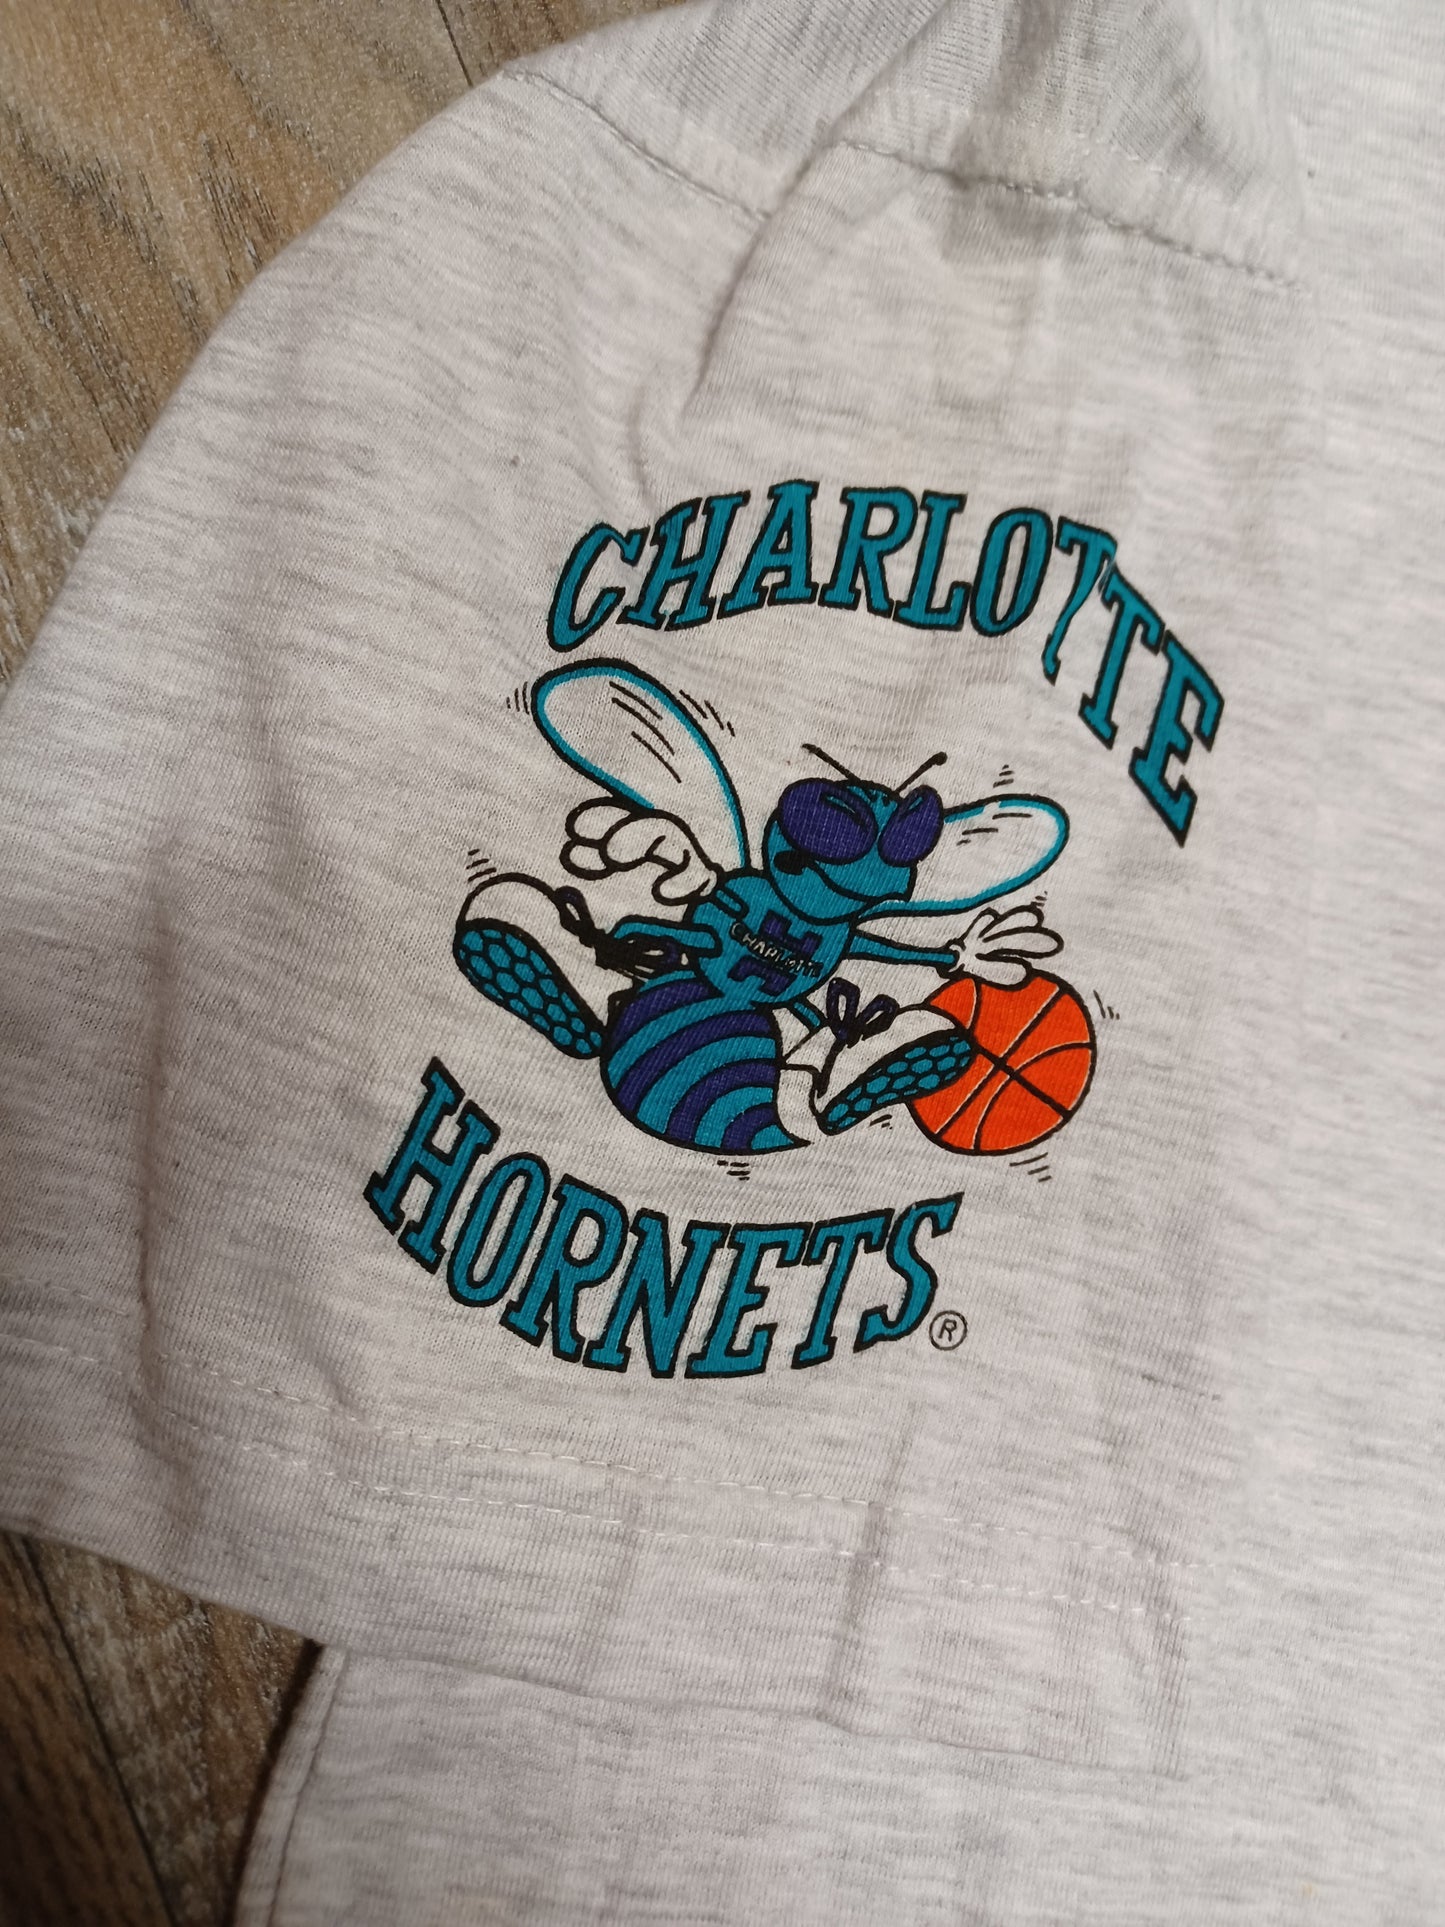 Charlotte Hornets T-Shirt Size Small